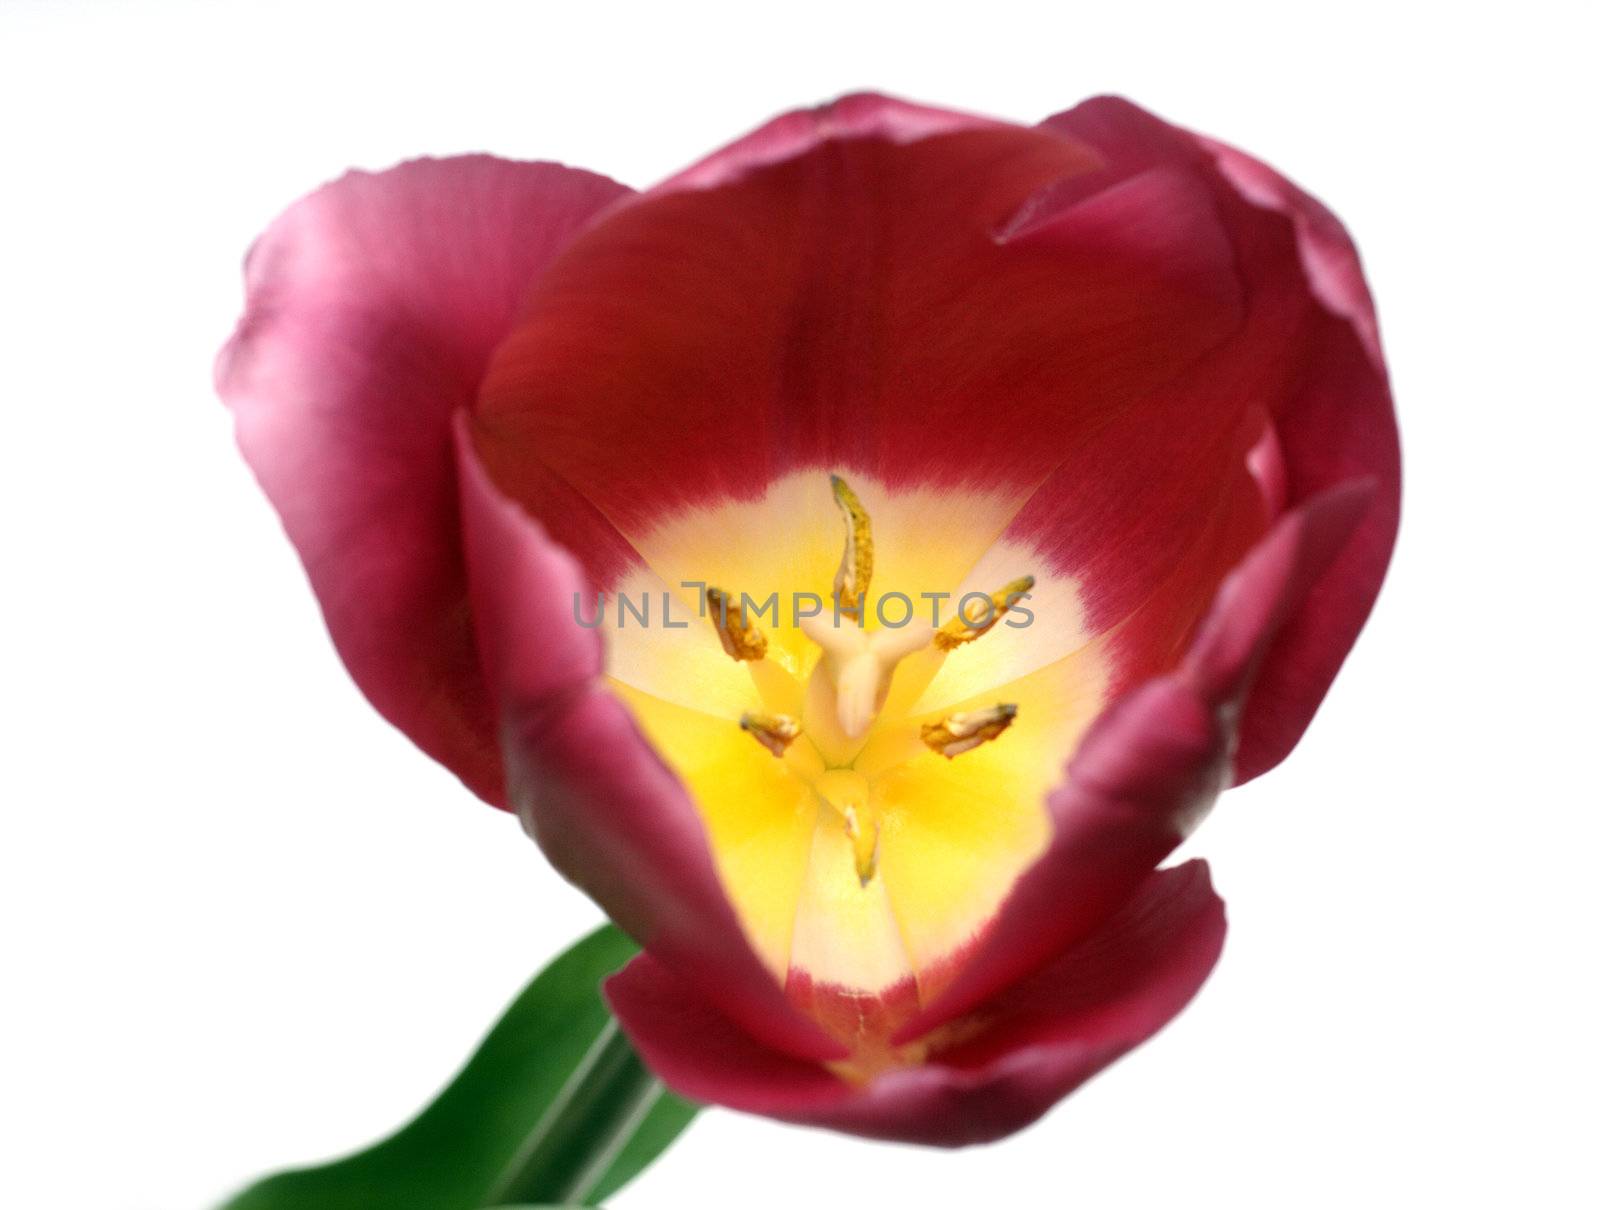 close-up view on tulip by Mikko